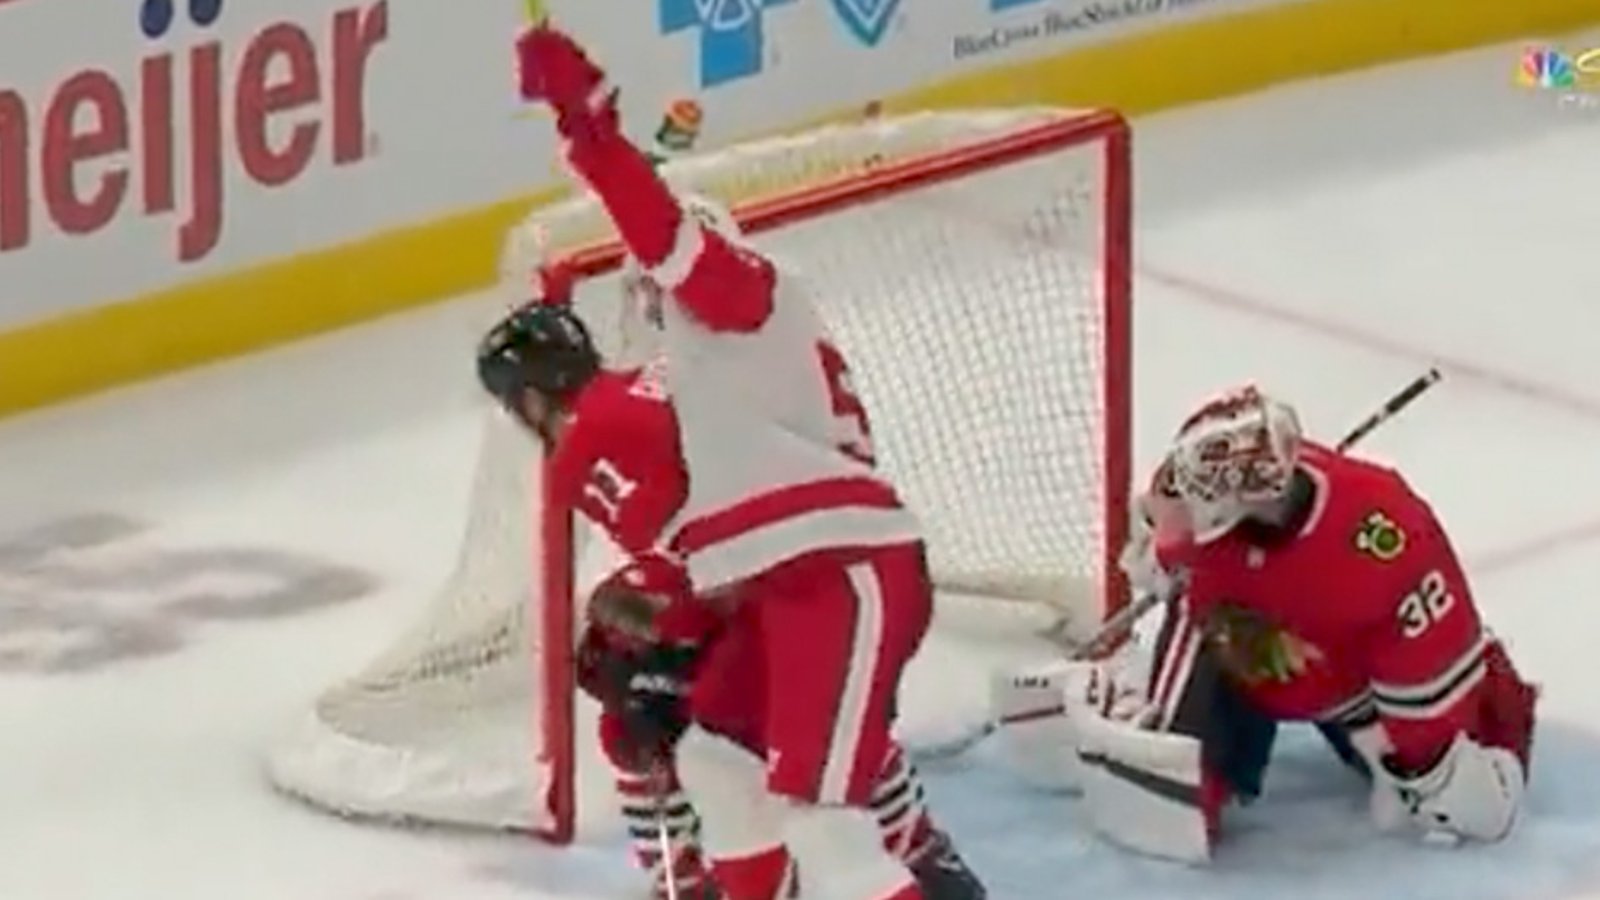 Bobby Ryan scores game-tying tally with goalie pulled (VIDEO) 